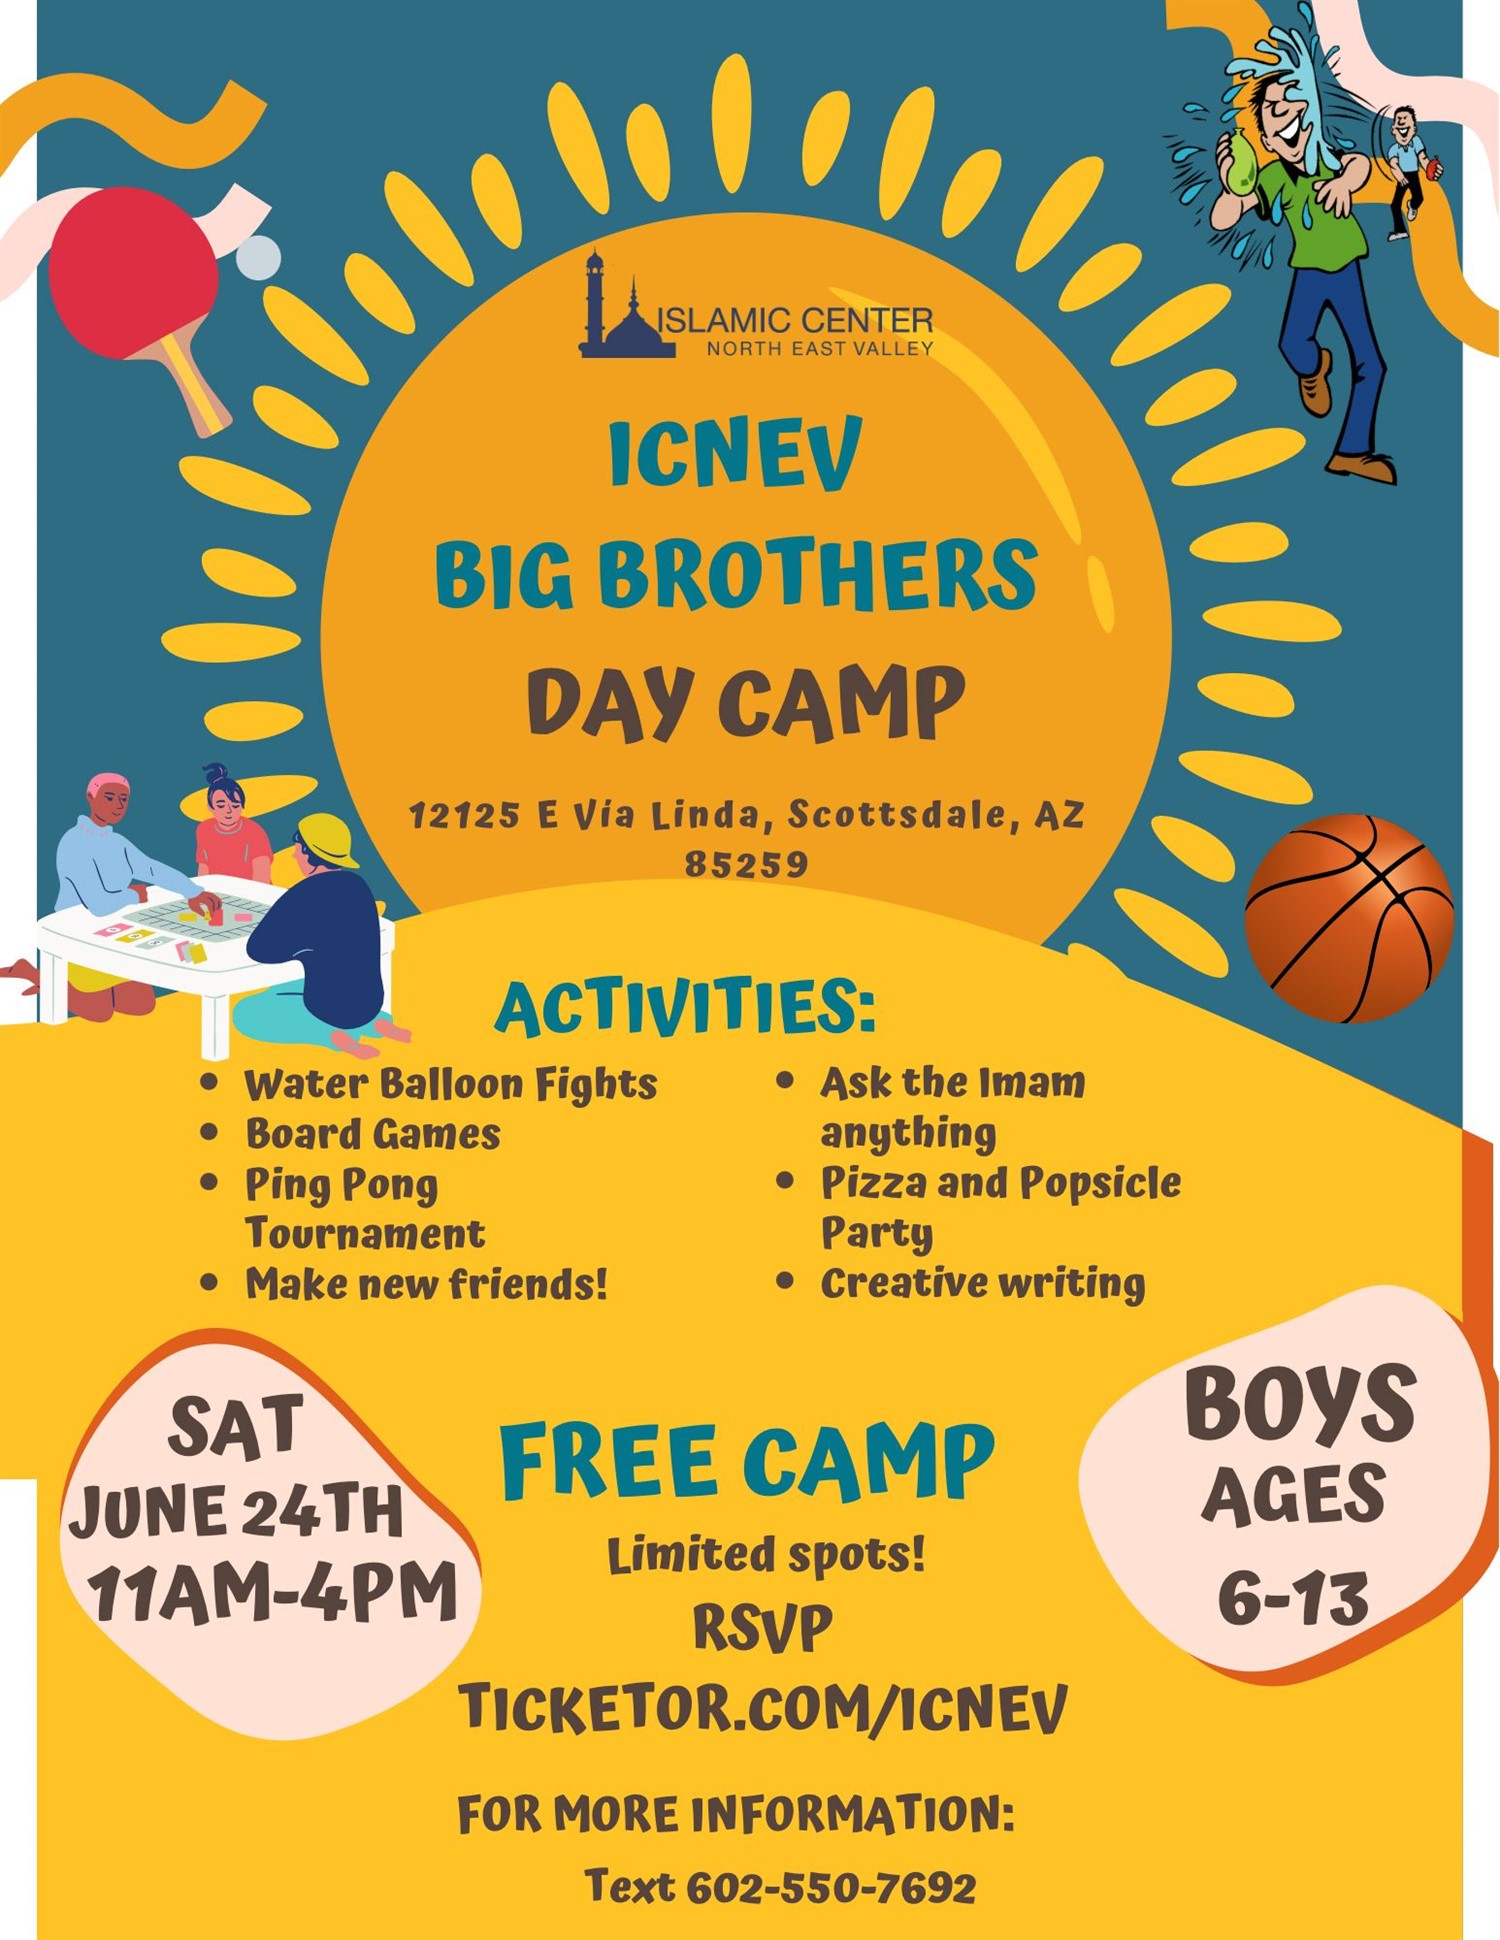 ICNEV Big Brother’s Day Camp  on Jun 24, 11:00@Islamic Center of North East Valley - Buy tickets and Get information on Islamic Center of the North East Valley icnev